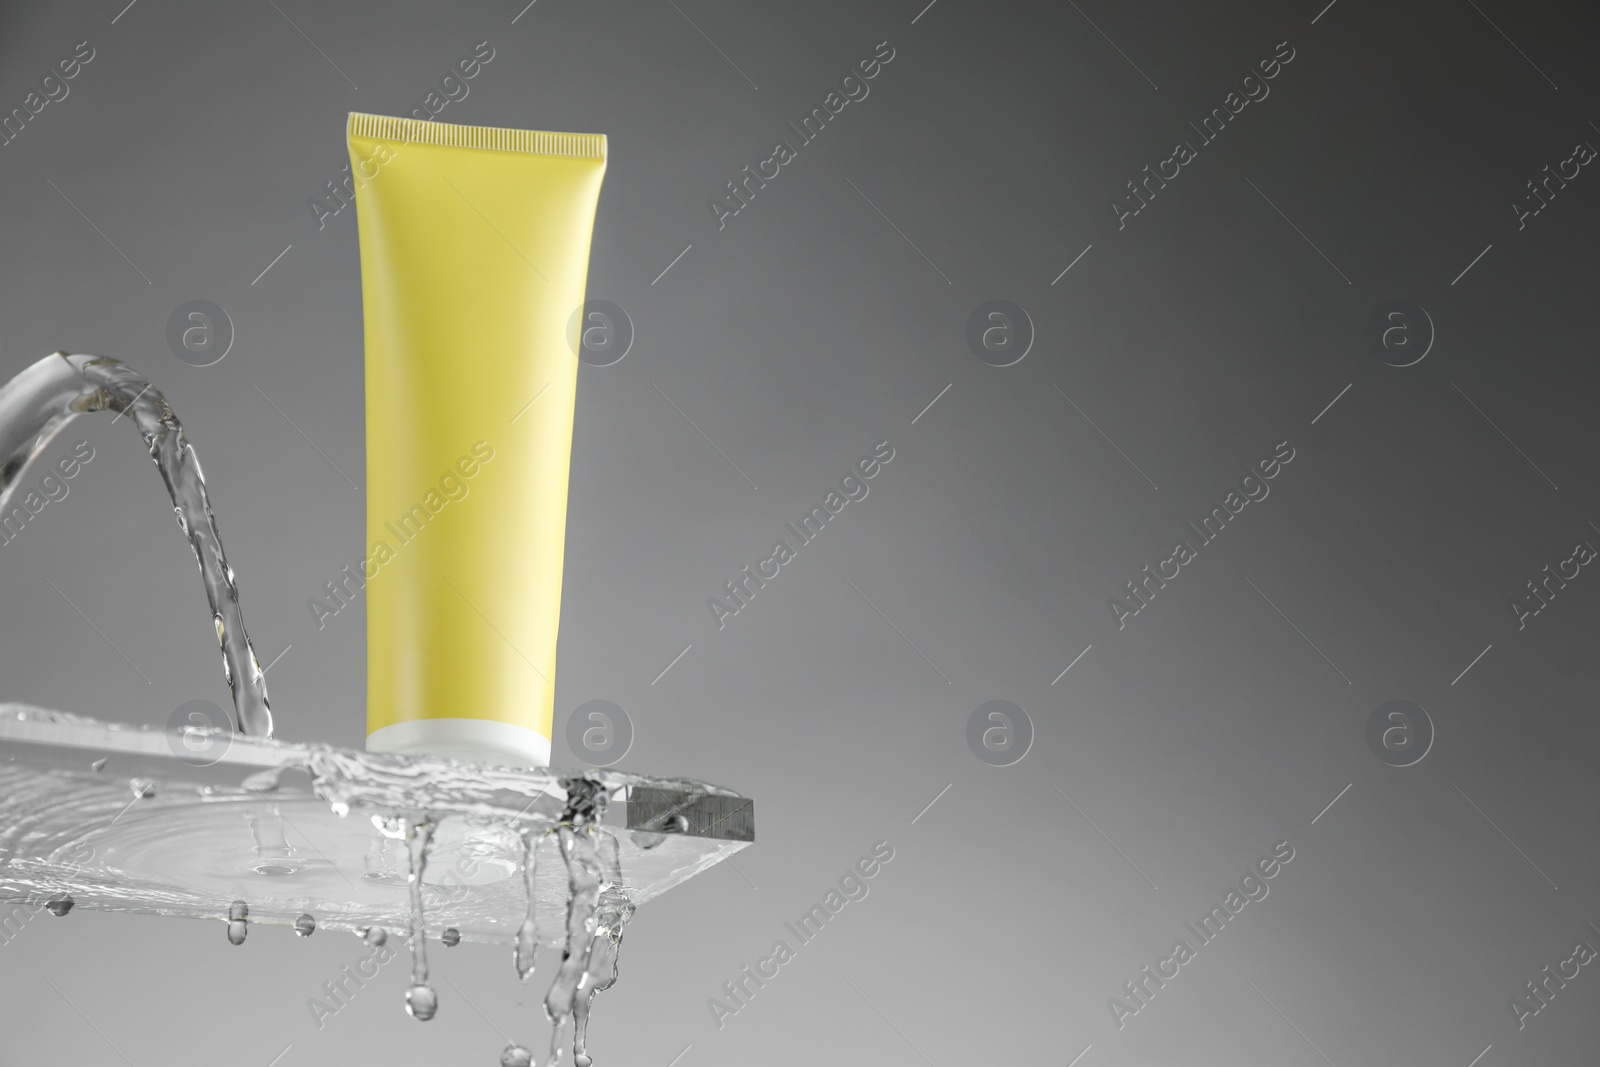 Photo of Moisturizing cream in tube on glass with water drops against grey background, low angle view. Space for text